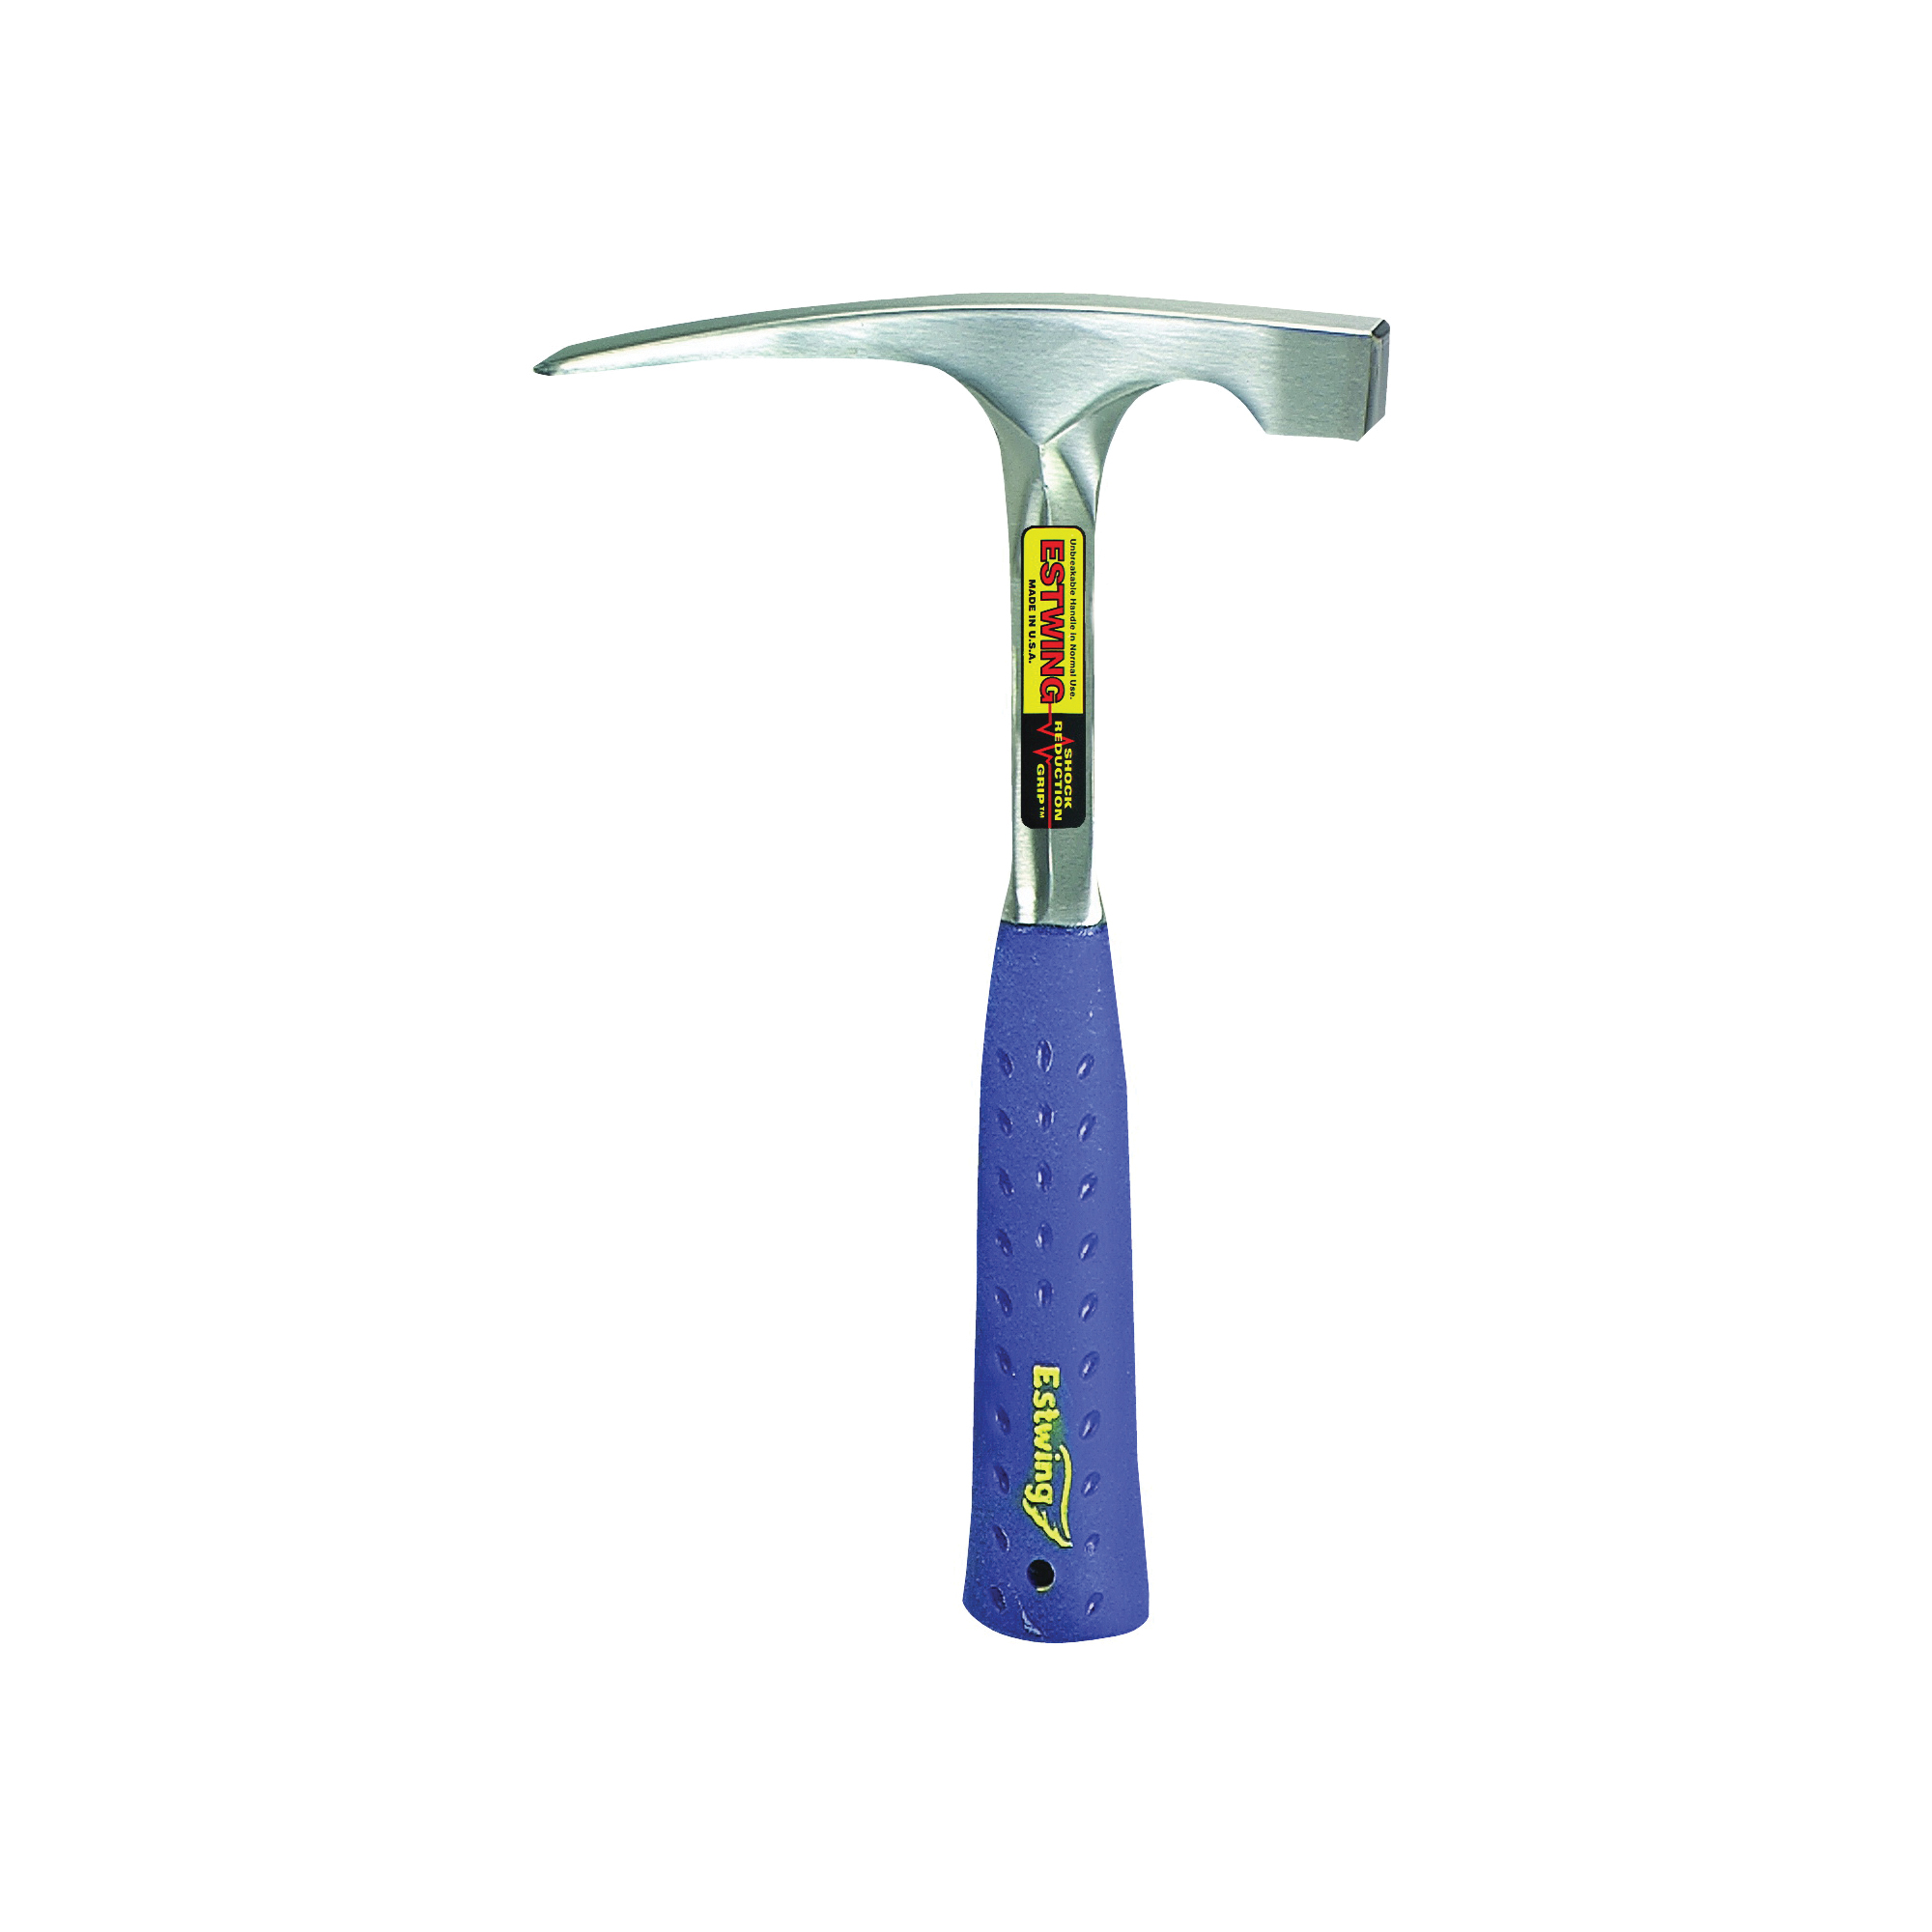 Estwing E3-20BLC/E3-20BL Bricklayer Hammer, 20 oz Head, Tile Setter, Smooth Head, Steel Head, 11-1/4 in OAL - 2